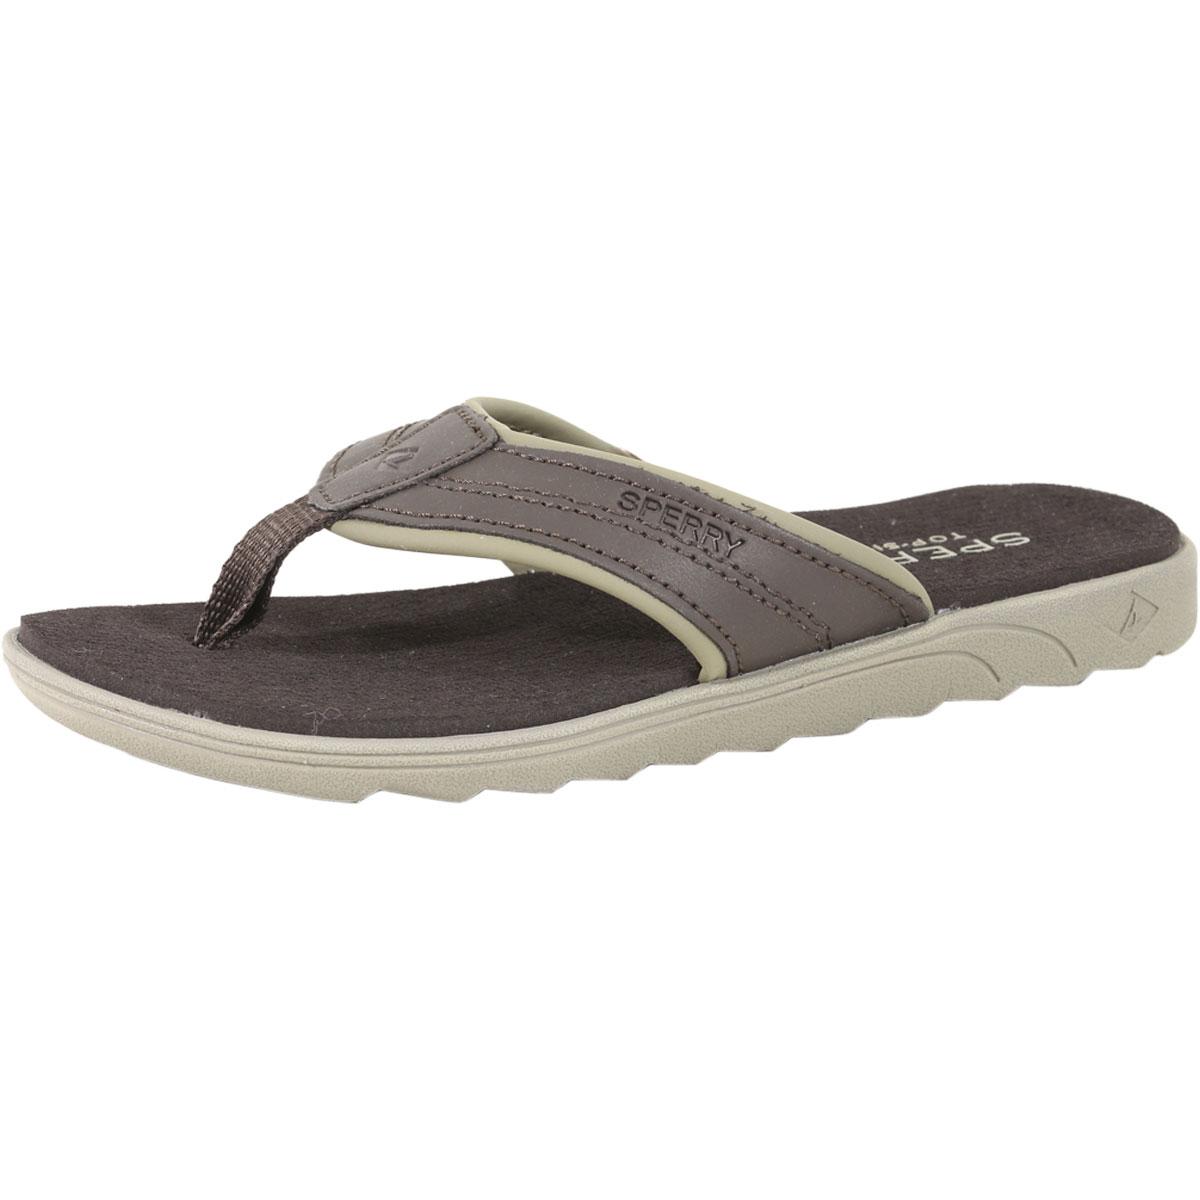 sperry men's sandals clearance